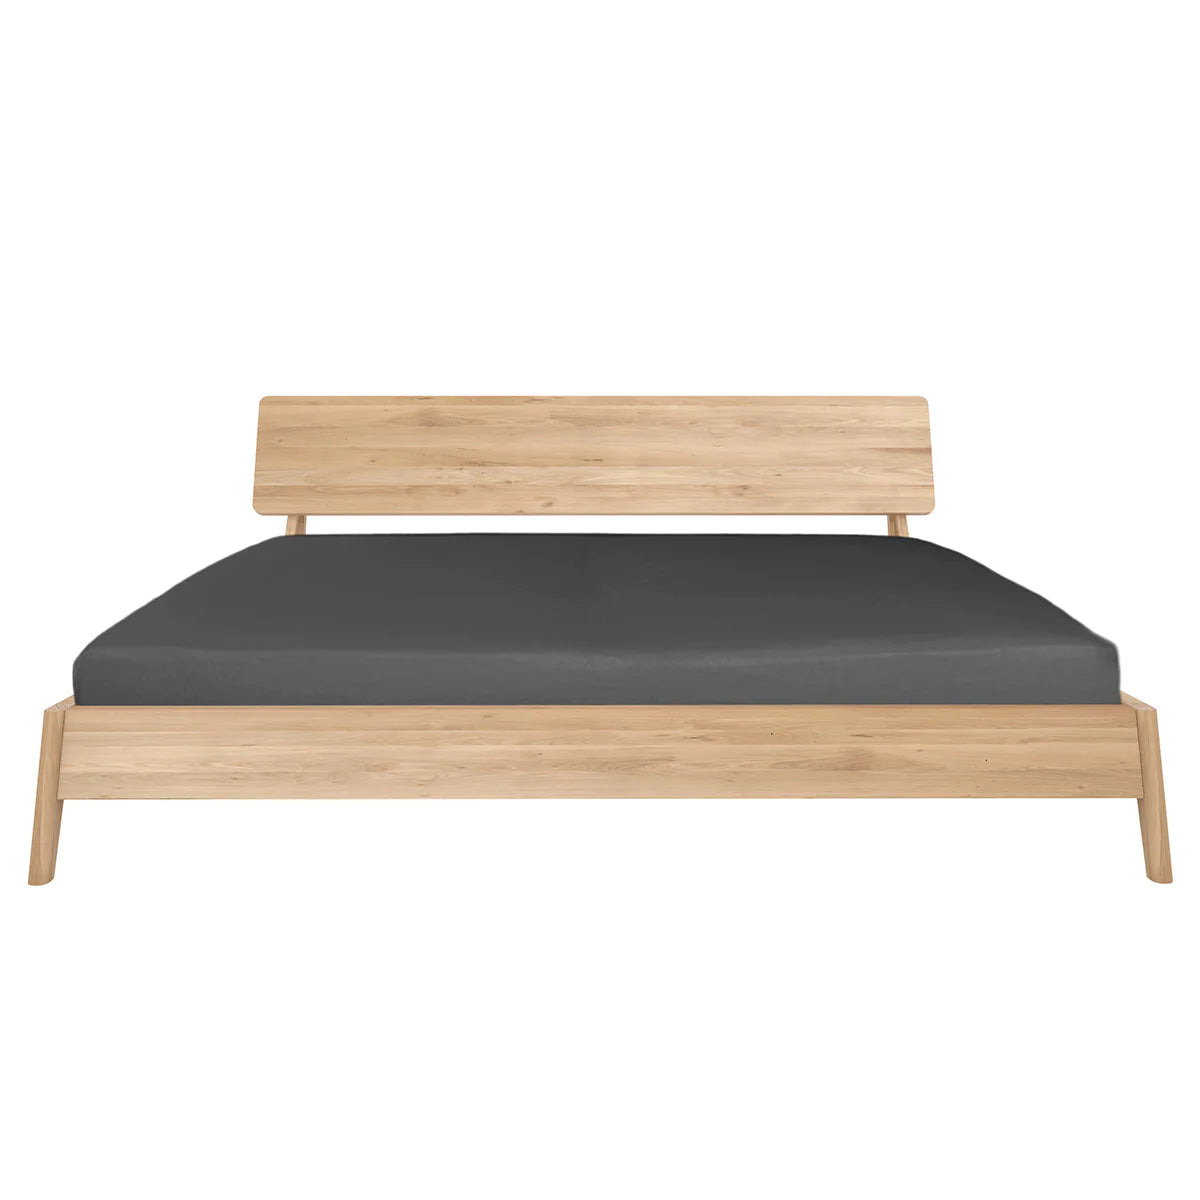 Ethnicraft Oak Air Bed is available from Make Your House A Home, Bendigo, Victoria, Australia